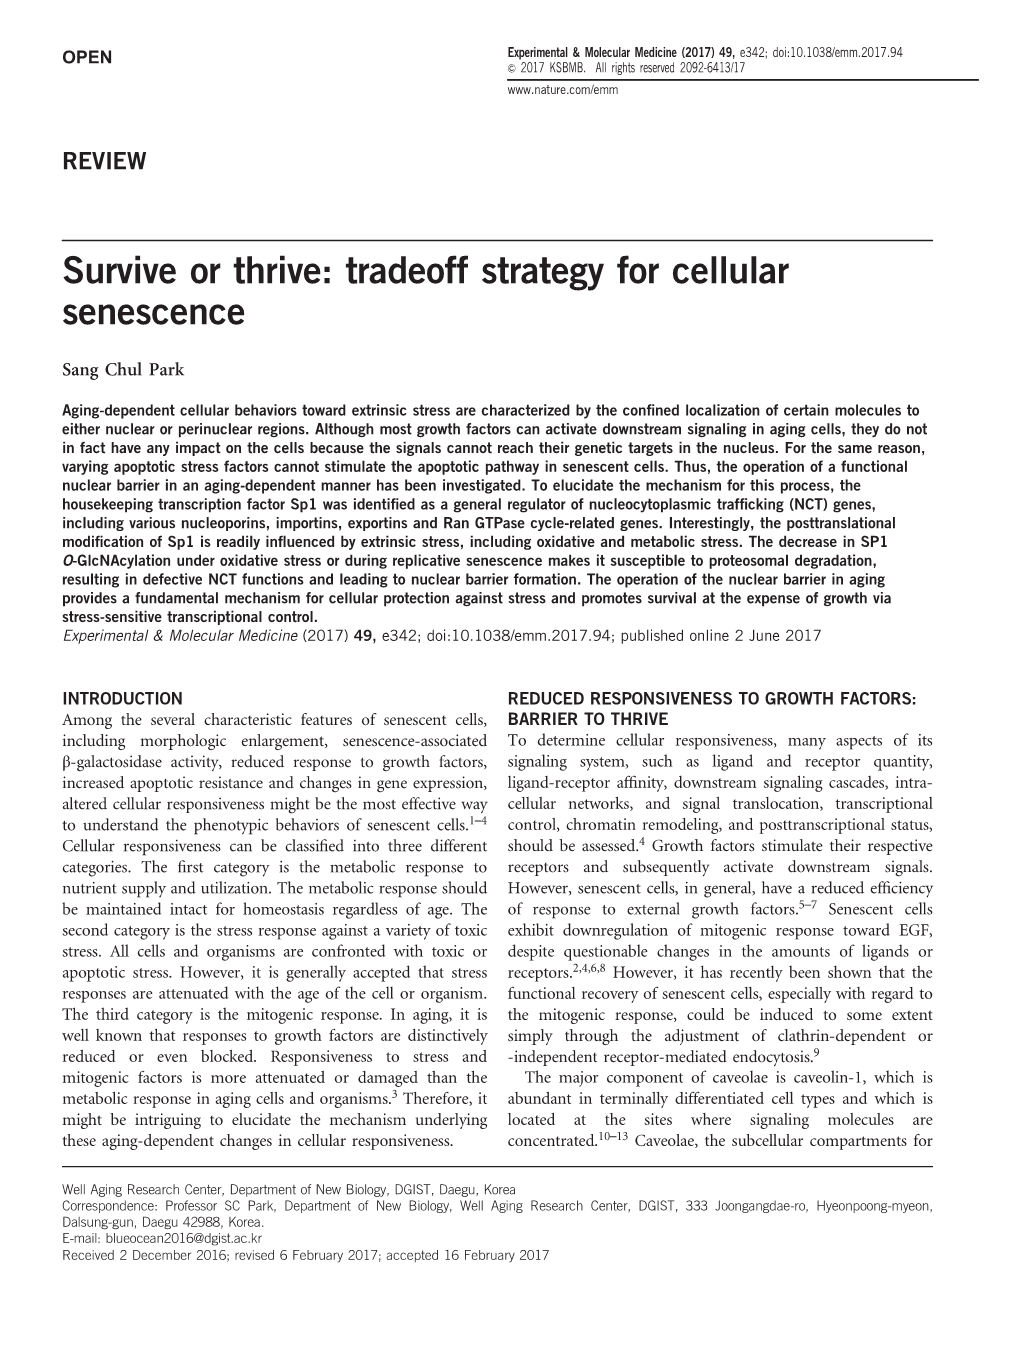 Tradeoff Strategy for Cellular Senescence